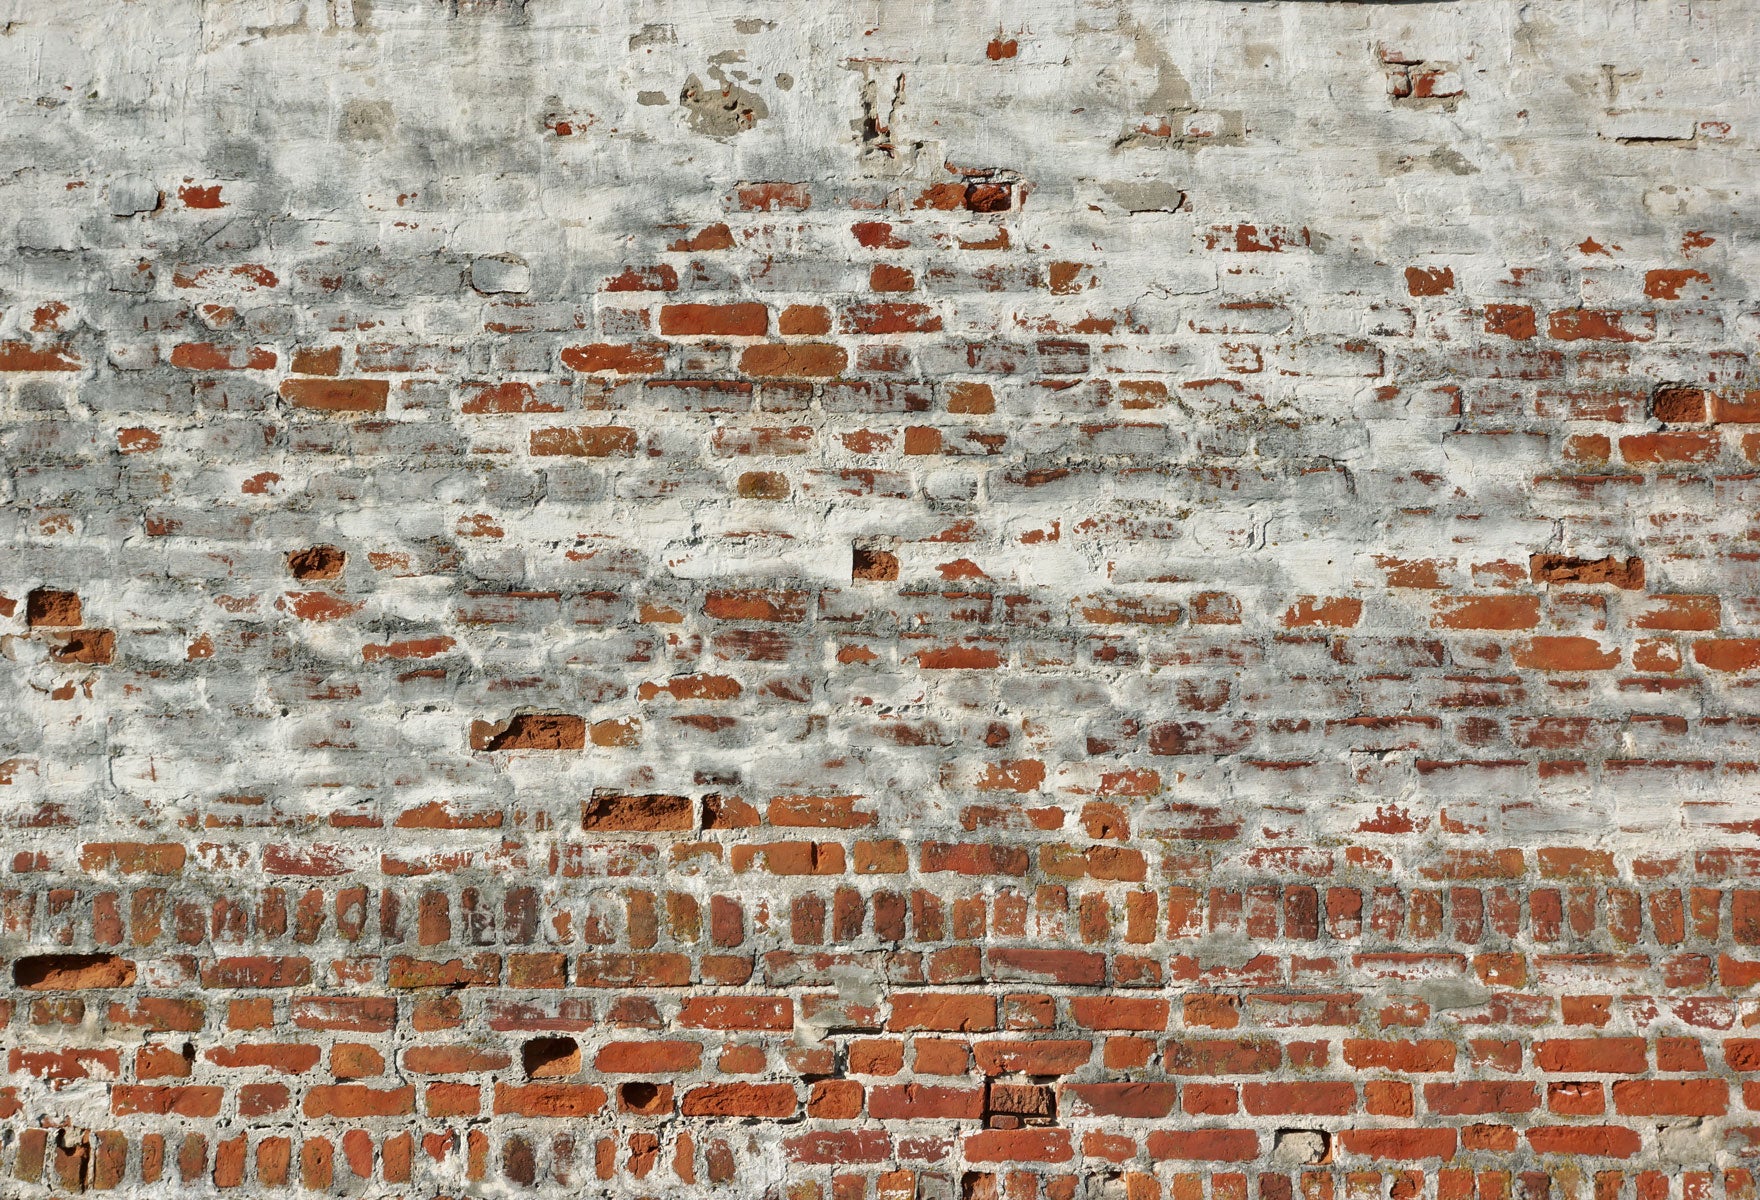 Kate Dilapidated Brick Wall Backdrops for Photography